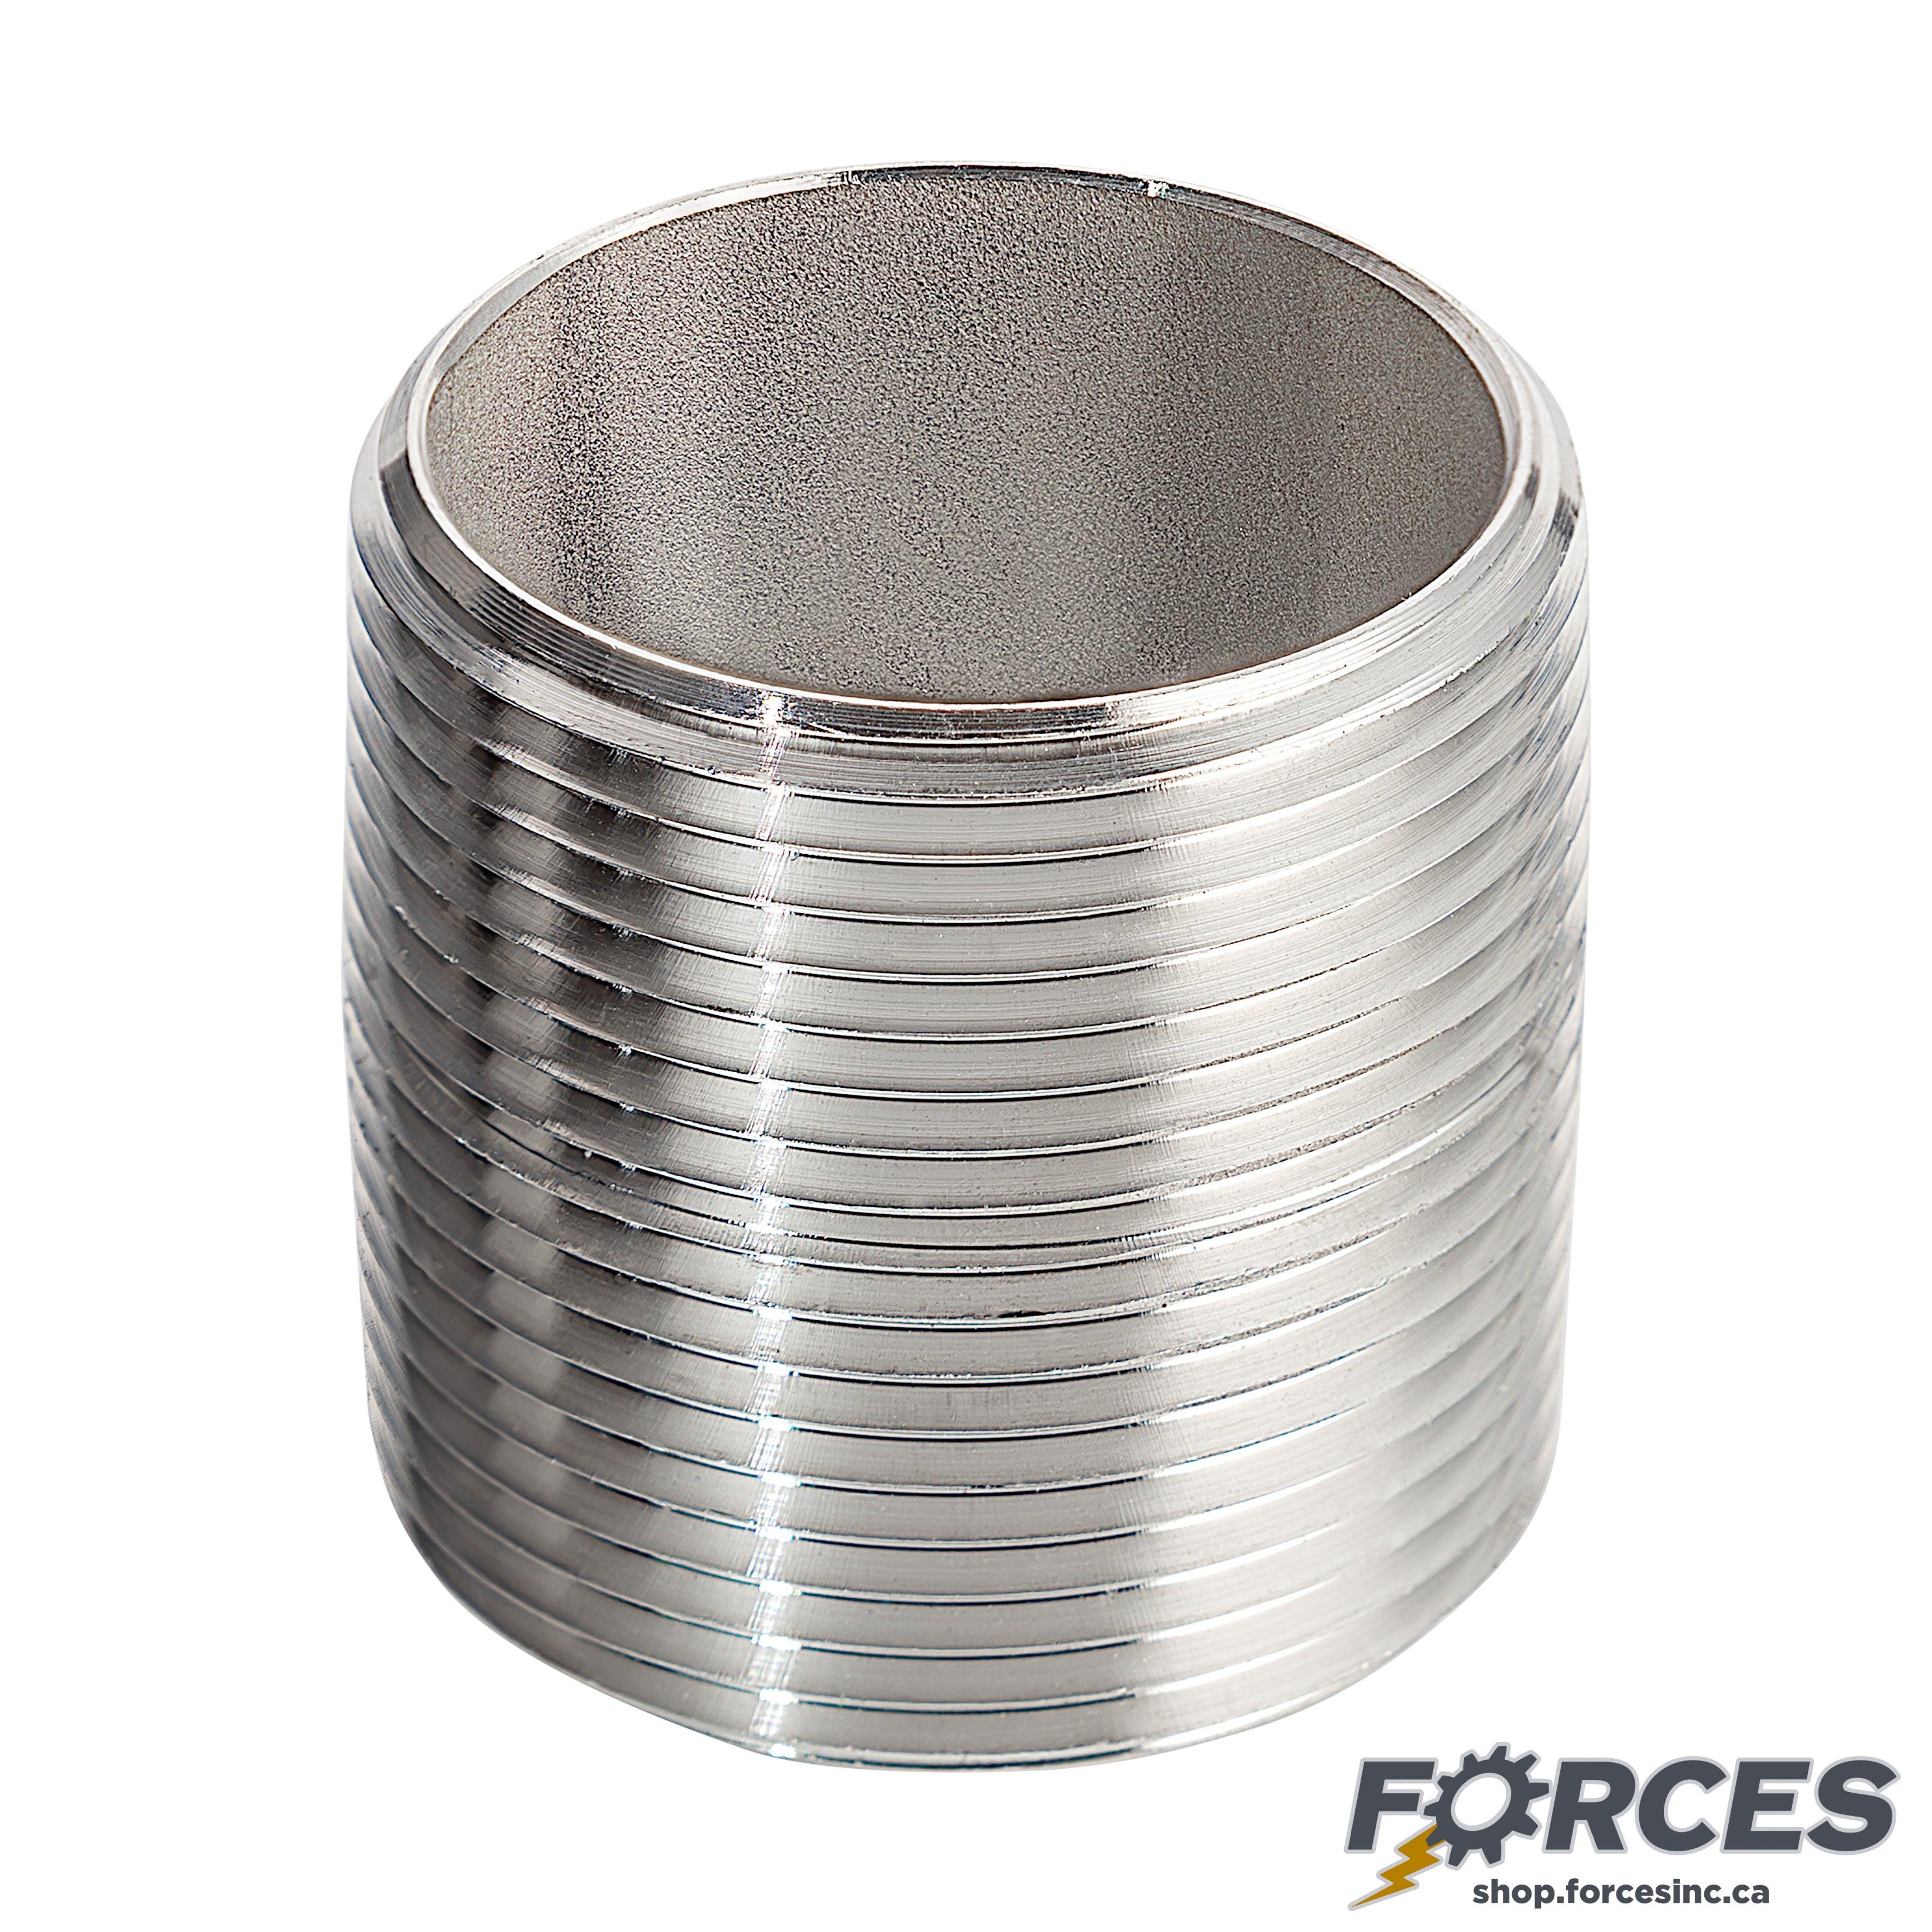 1-1/2" Closed Nipple - Stainless Steel 316 - Forces Inc